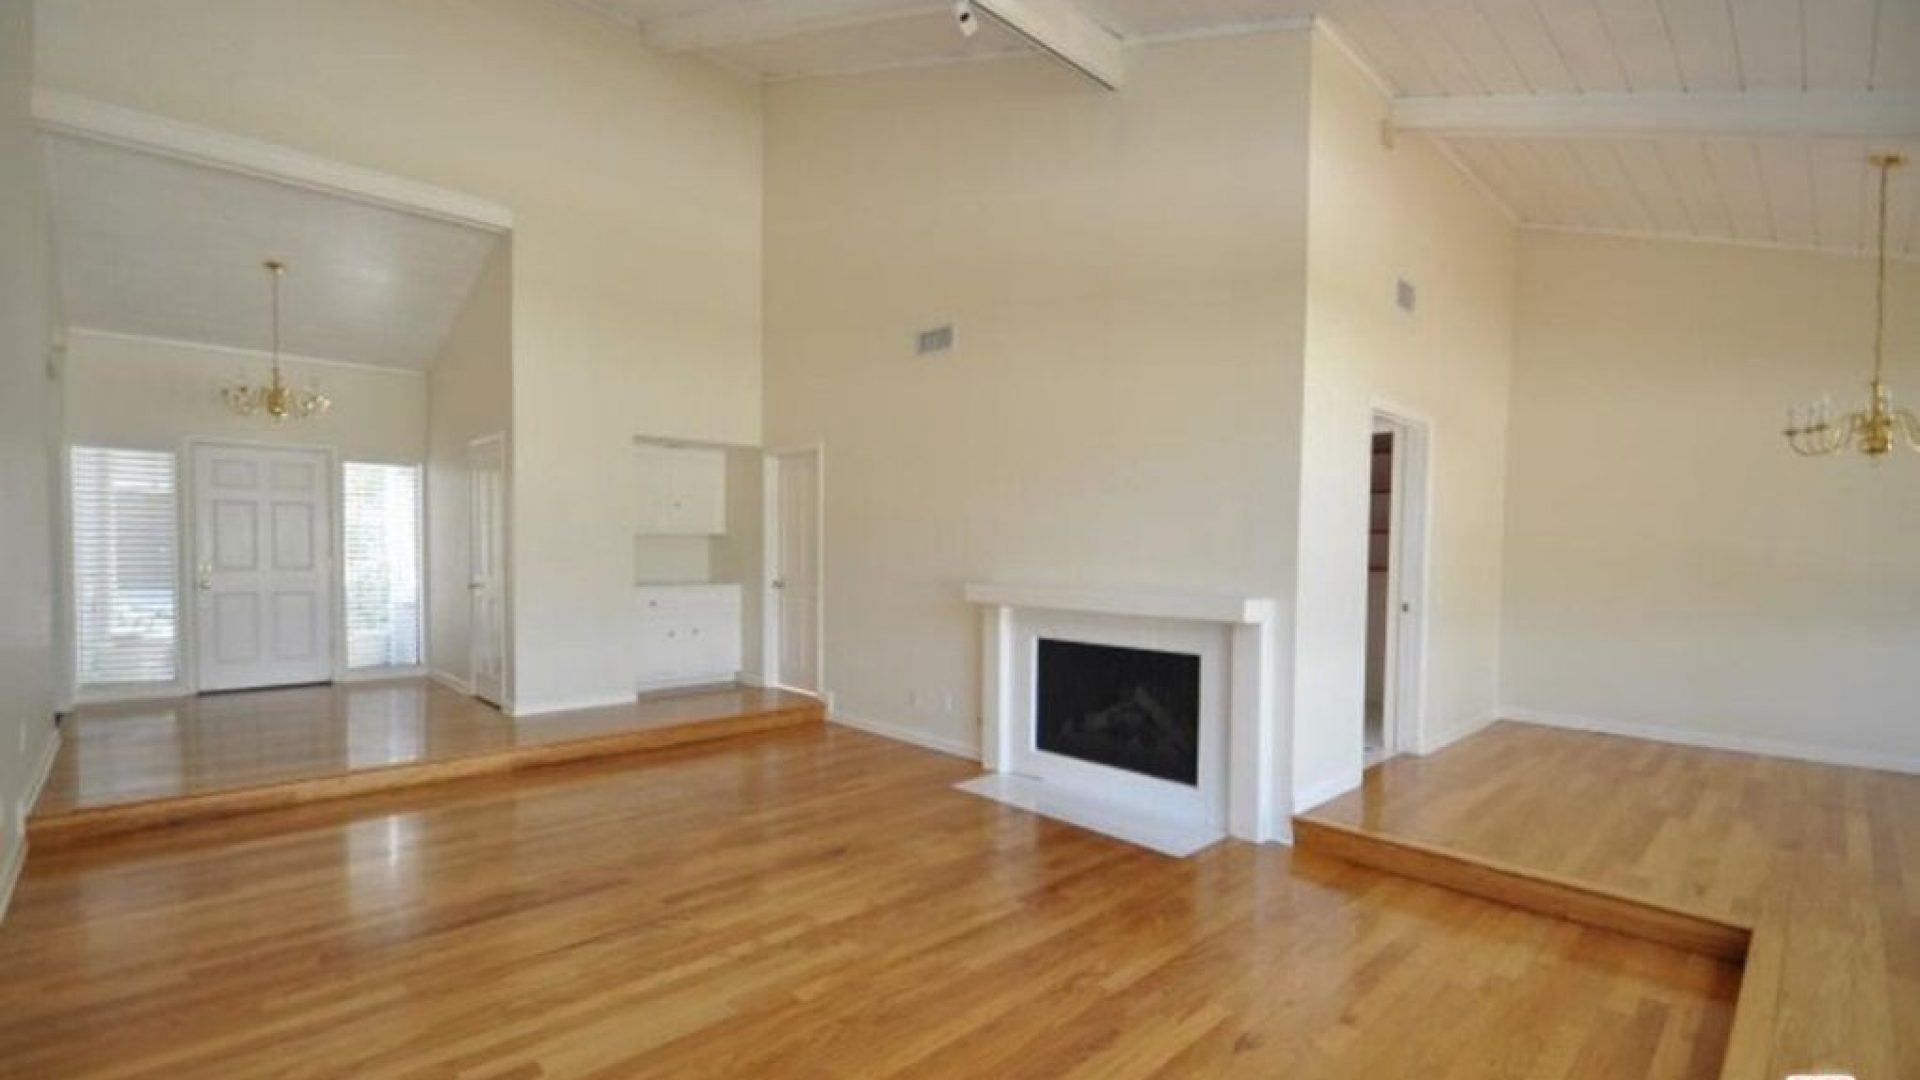 not furnished living room with hardwood floors